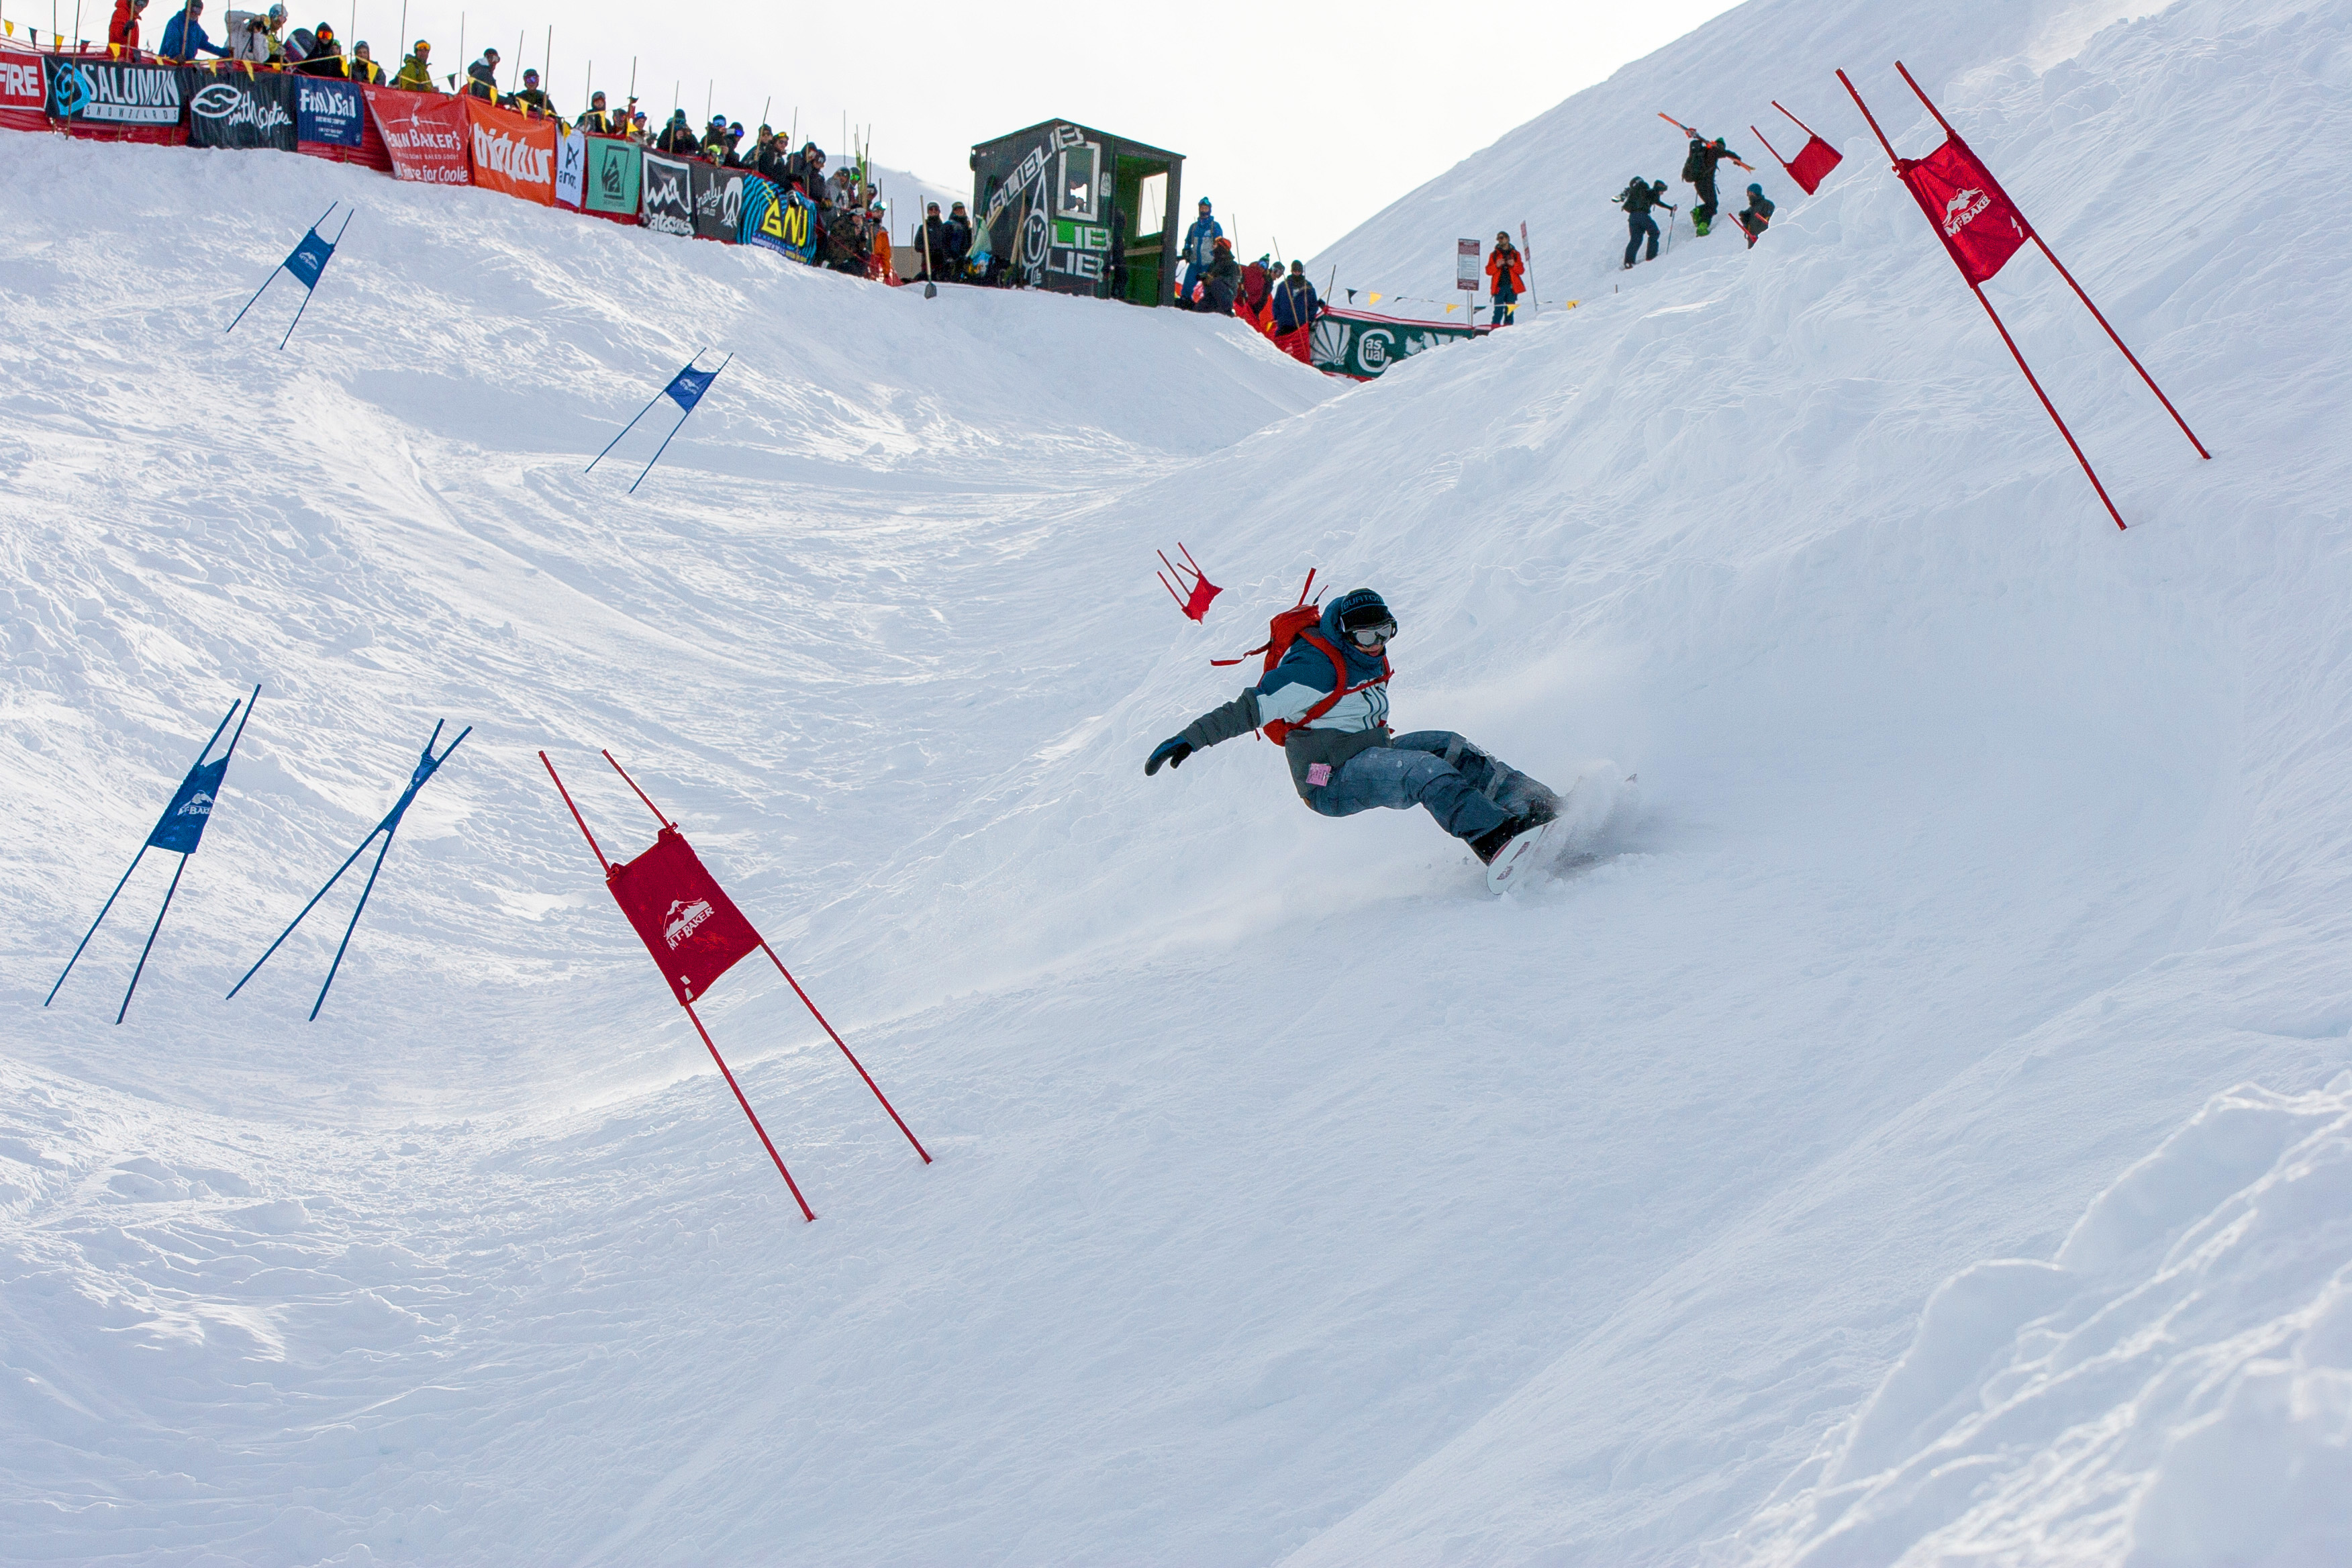 Legends in the Making at The 29th Annual Mt. Baker Banked Slalom